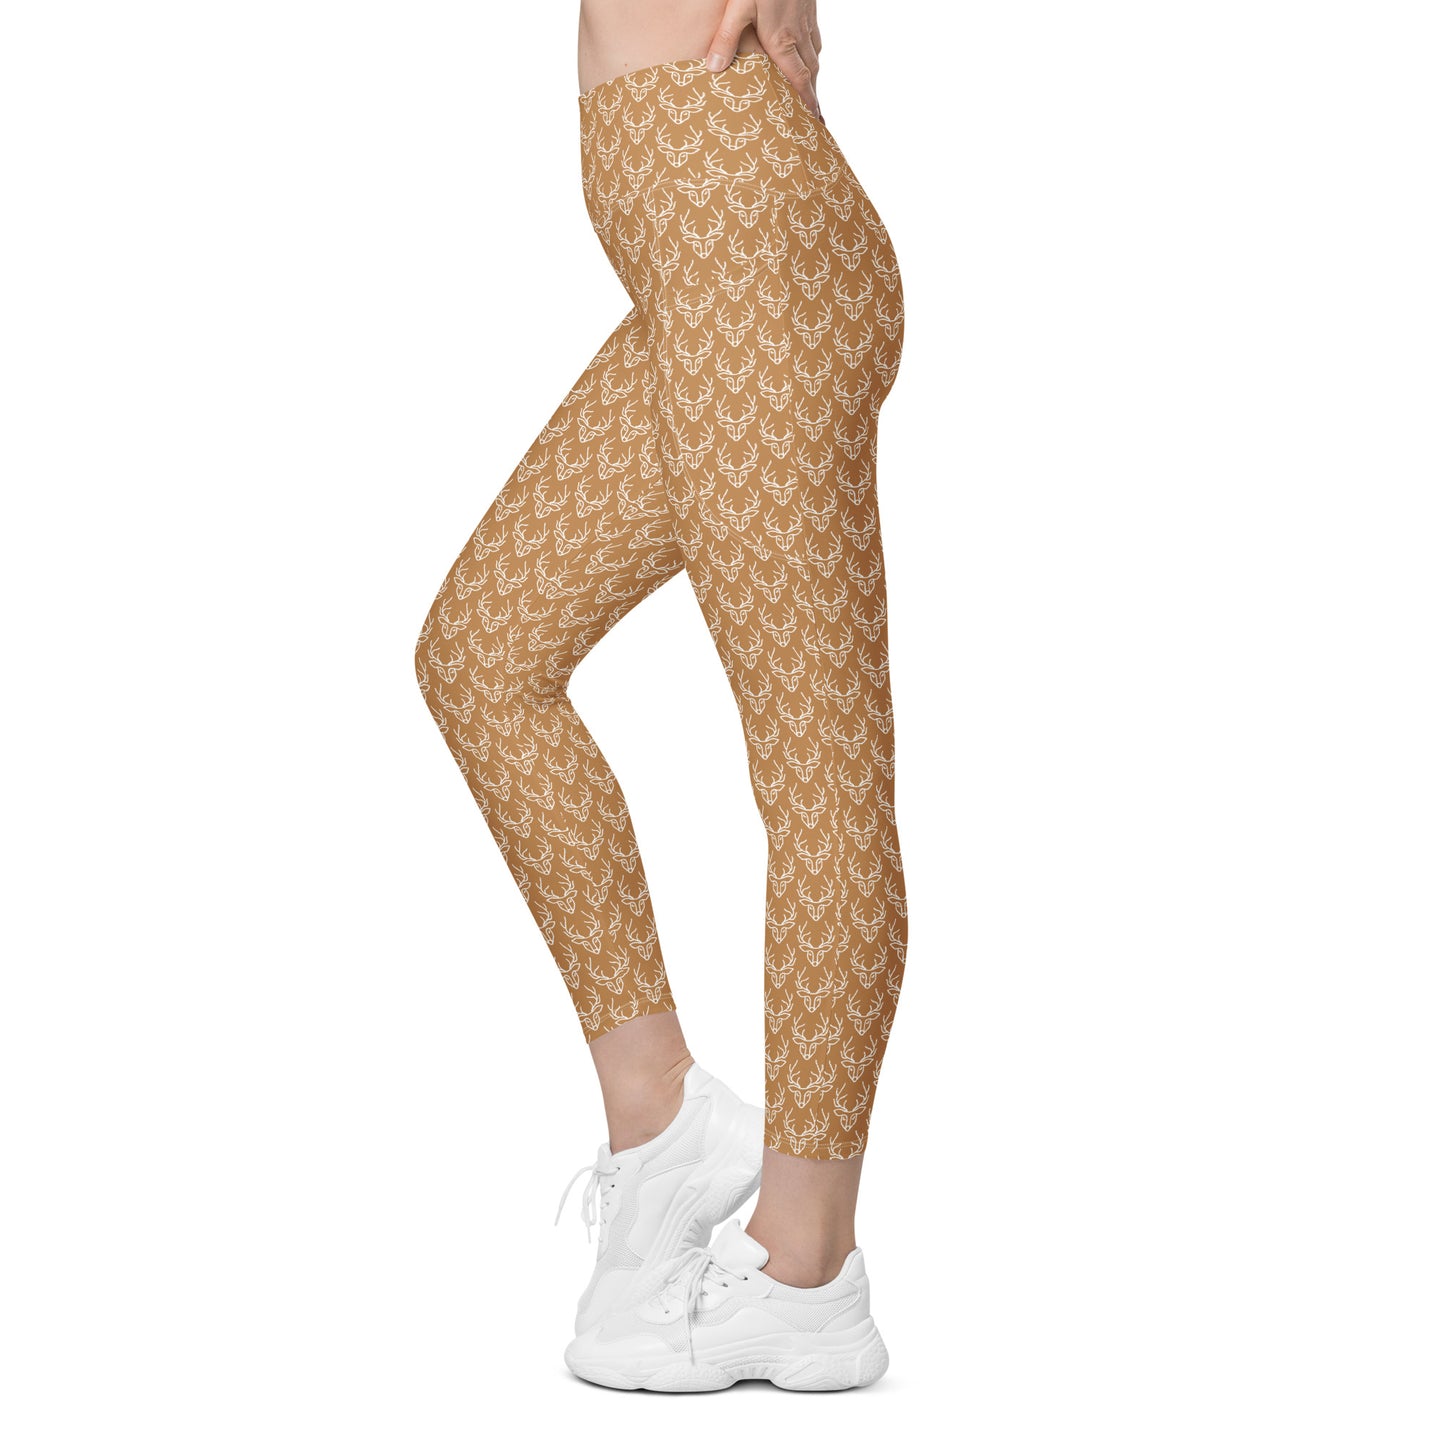 Yellow Deer Leggings with pockets